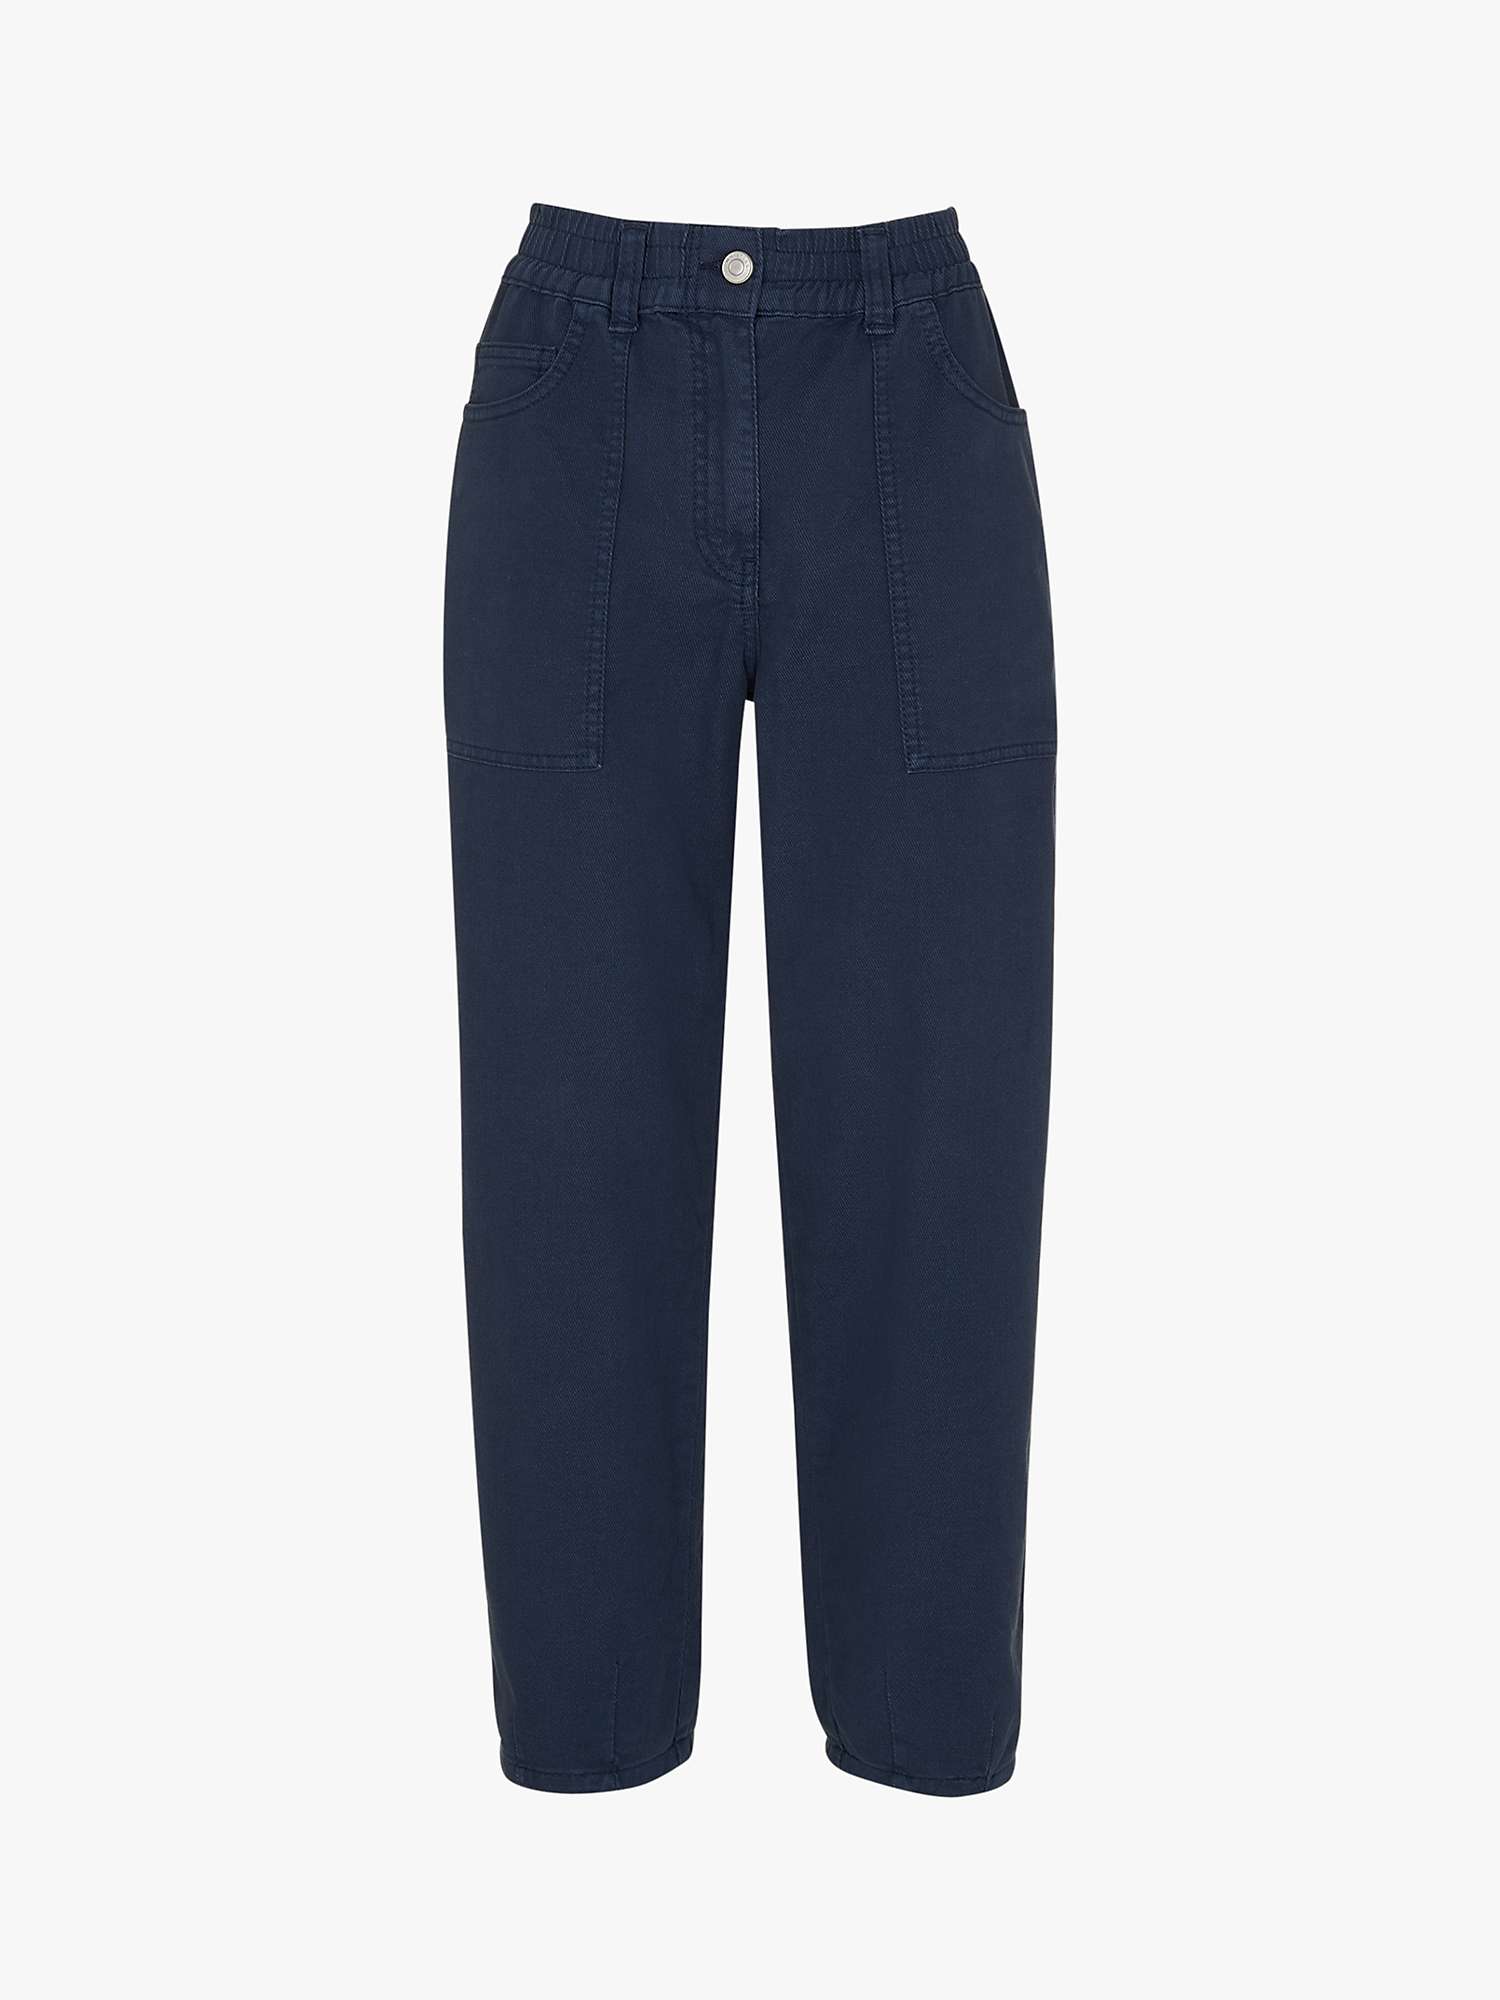 Whistles Tessa Casual Trousers, Navy, Navy at John Lewis & Partners